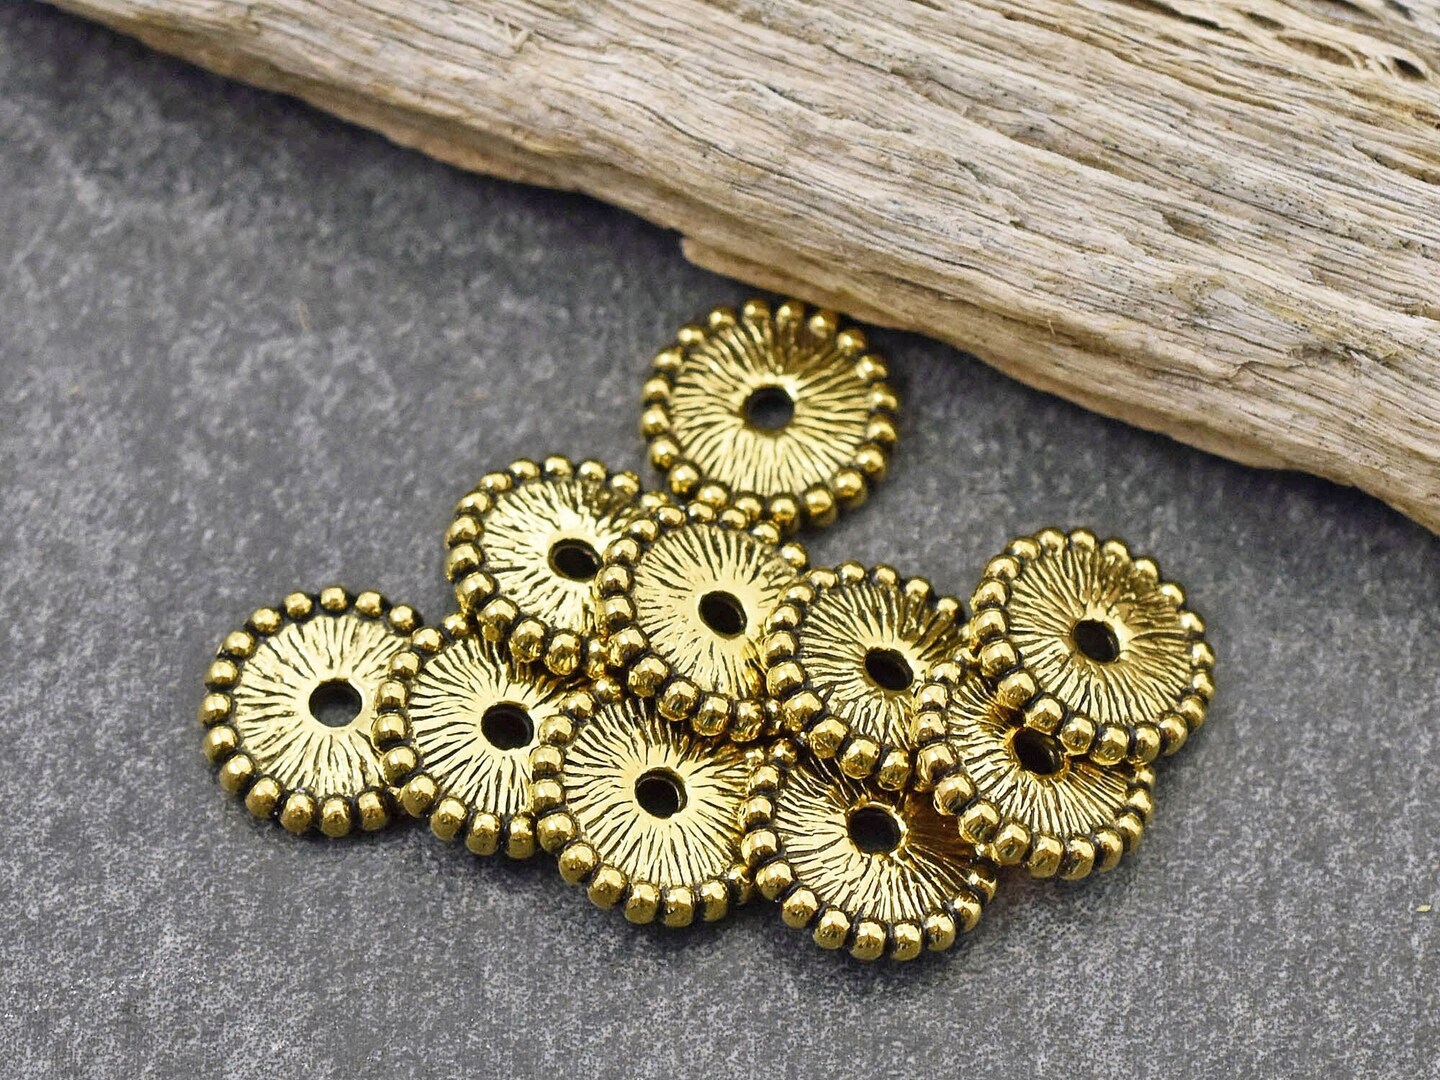 *25* 11x2mm Antique Gold Ridged Rondelle Spacer Beads